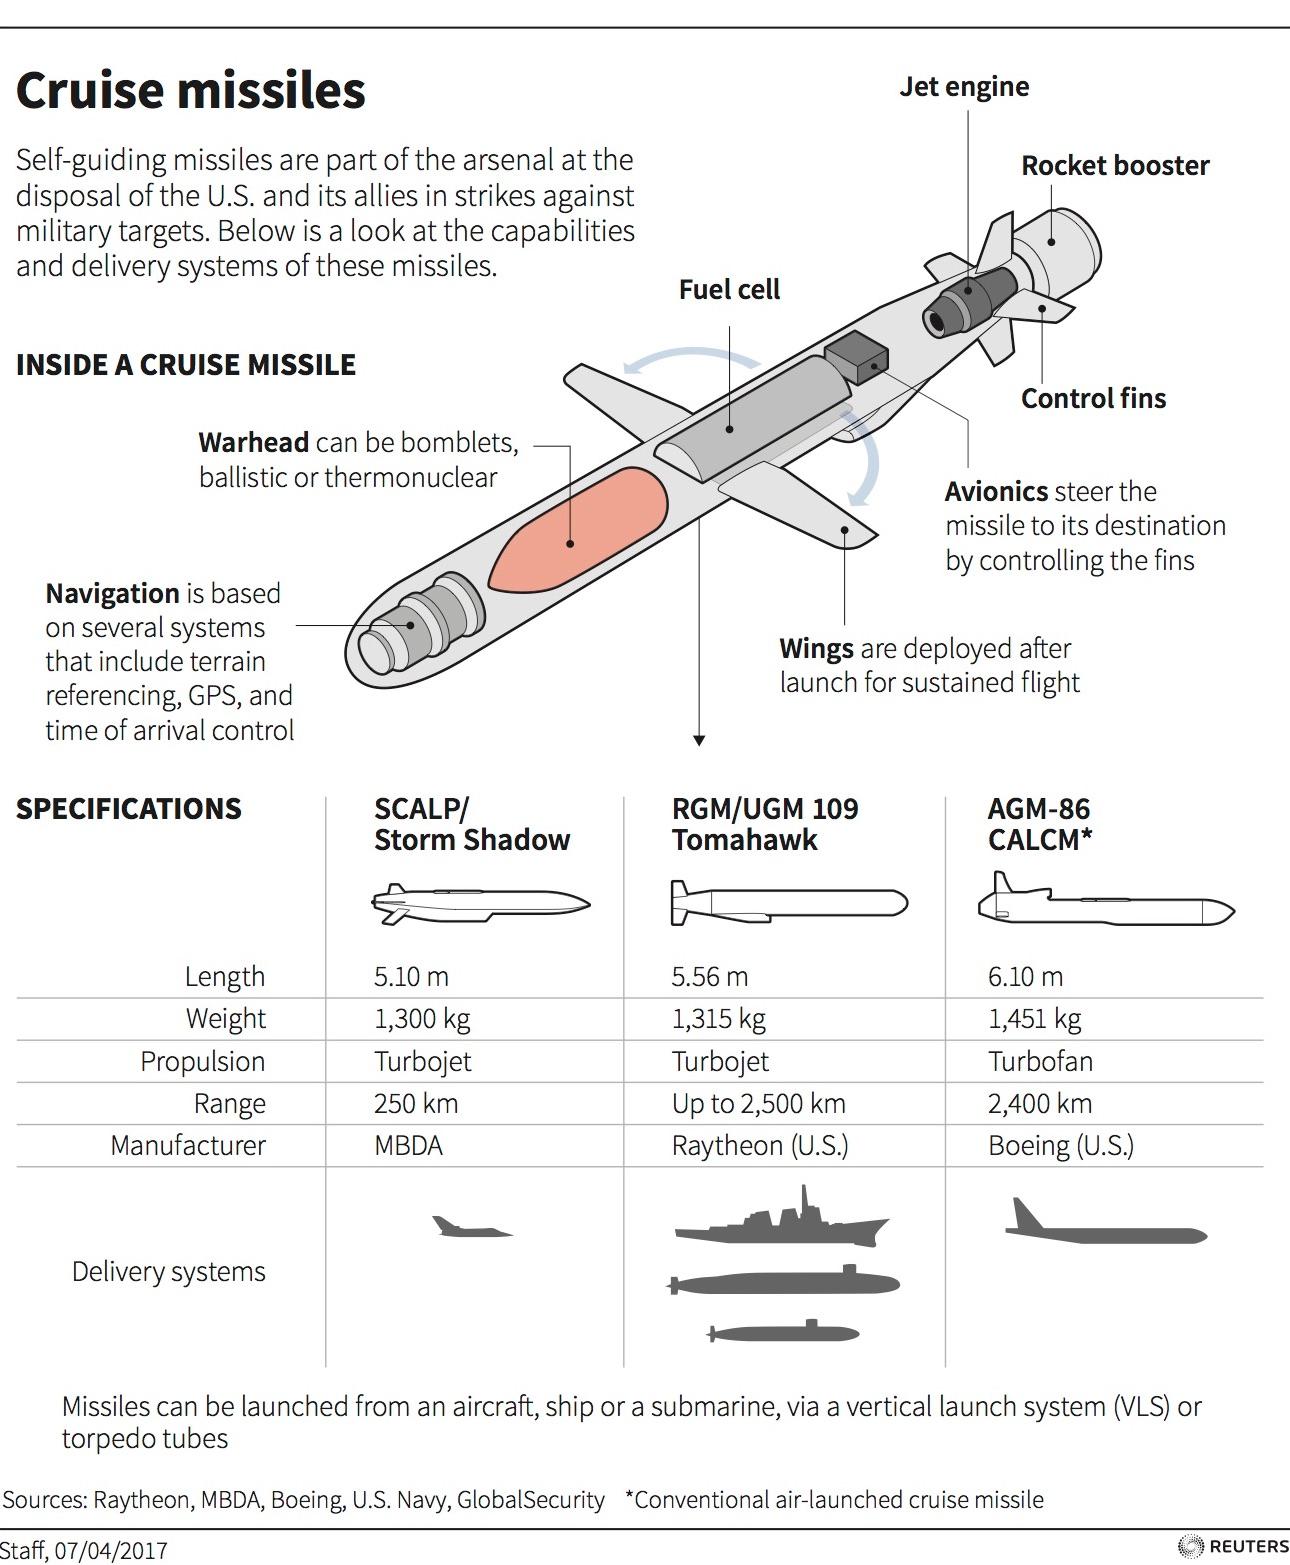 Cruise missiles used by the US and its allies.